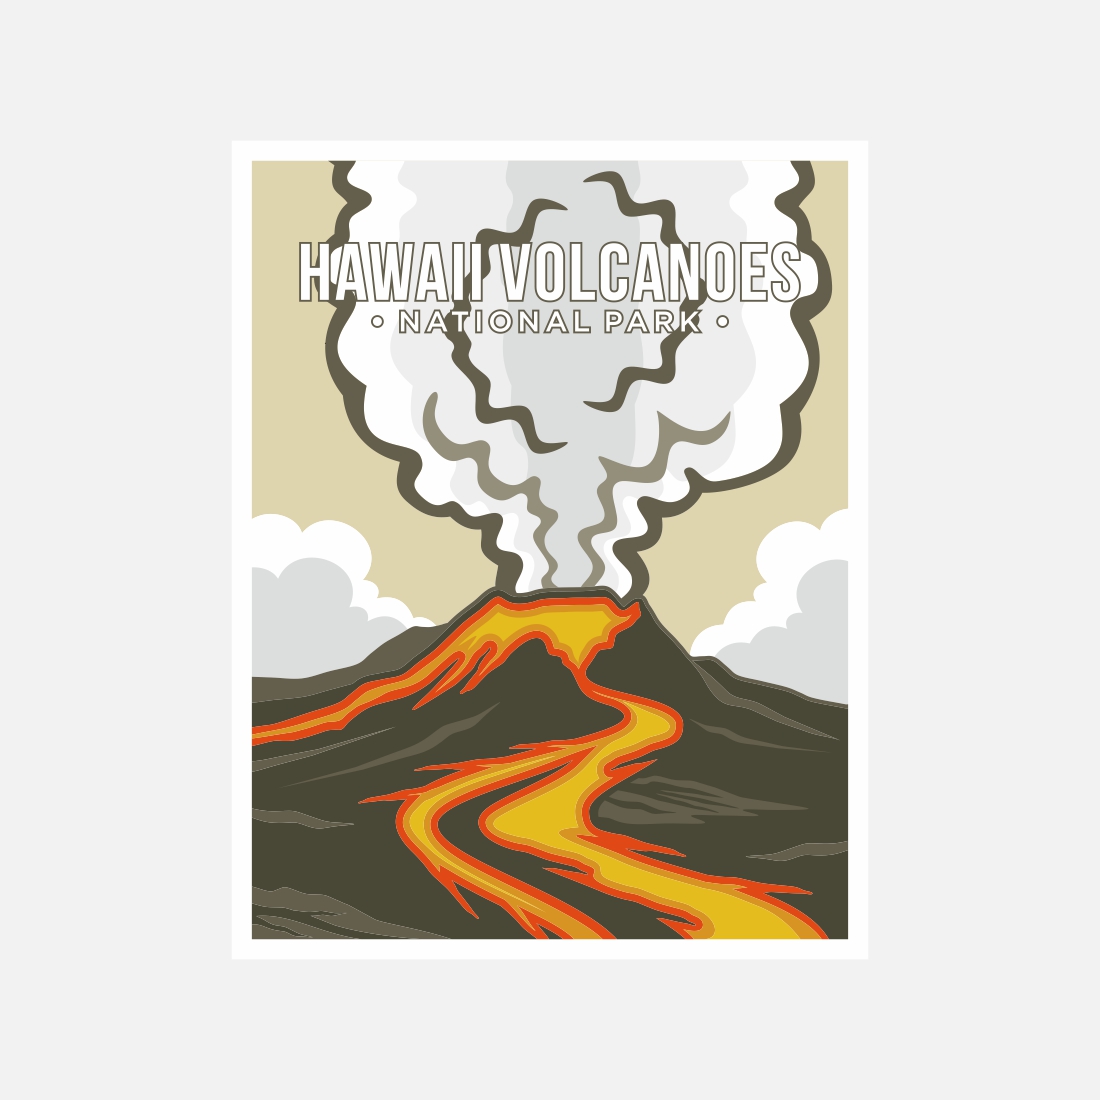 Hawaii Volcano National Park poster vector illustration design – Only $8 preview image.